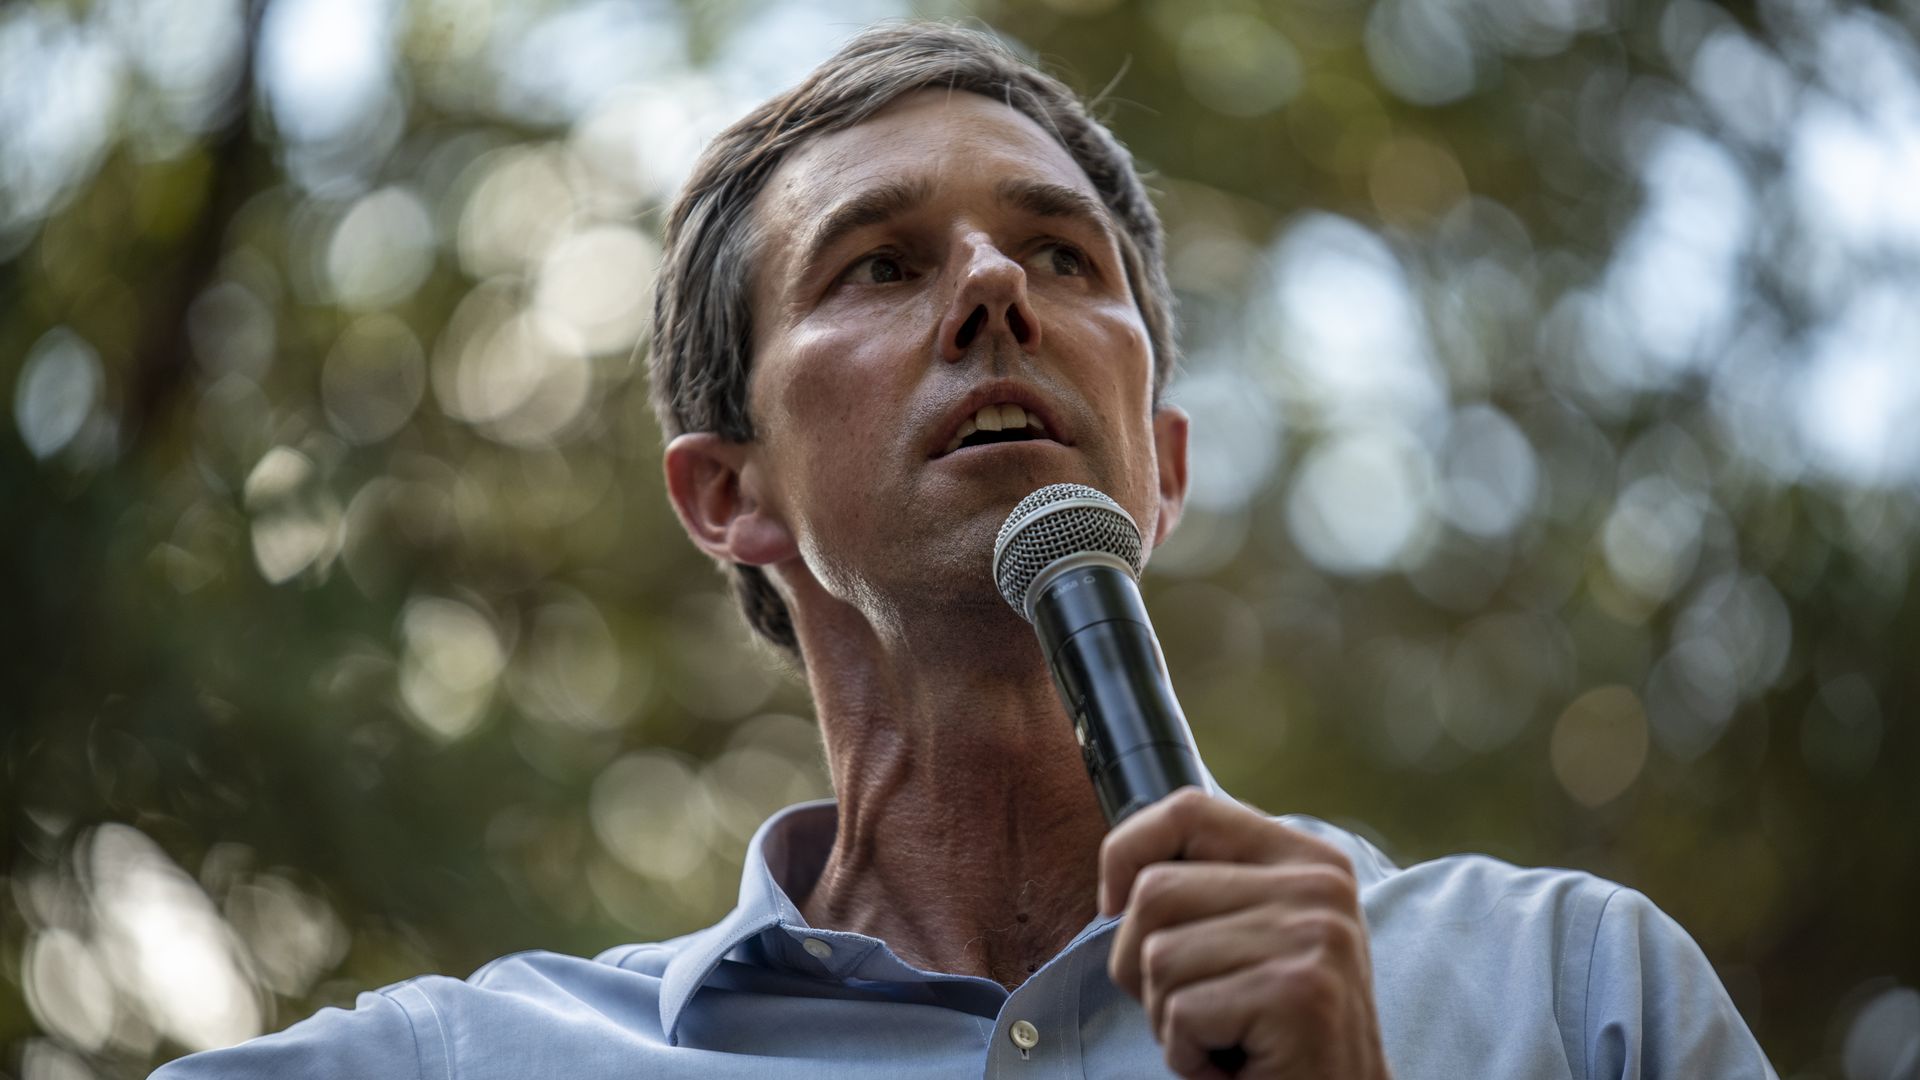 Beto O'Rourke is seen speaking during a political event.